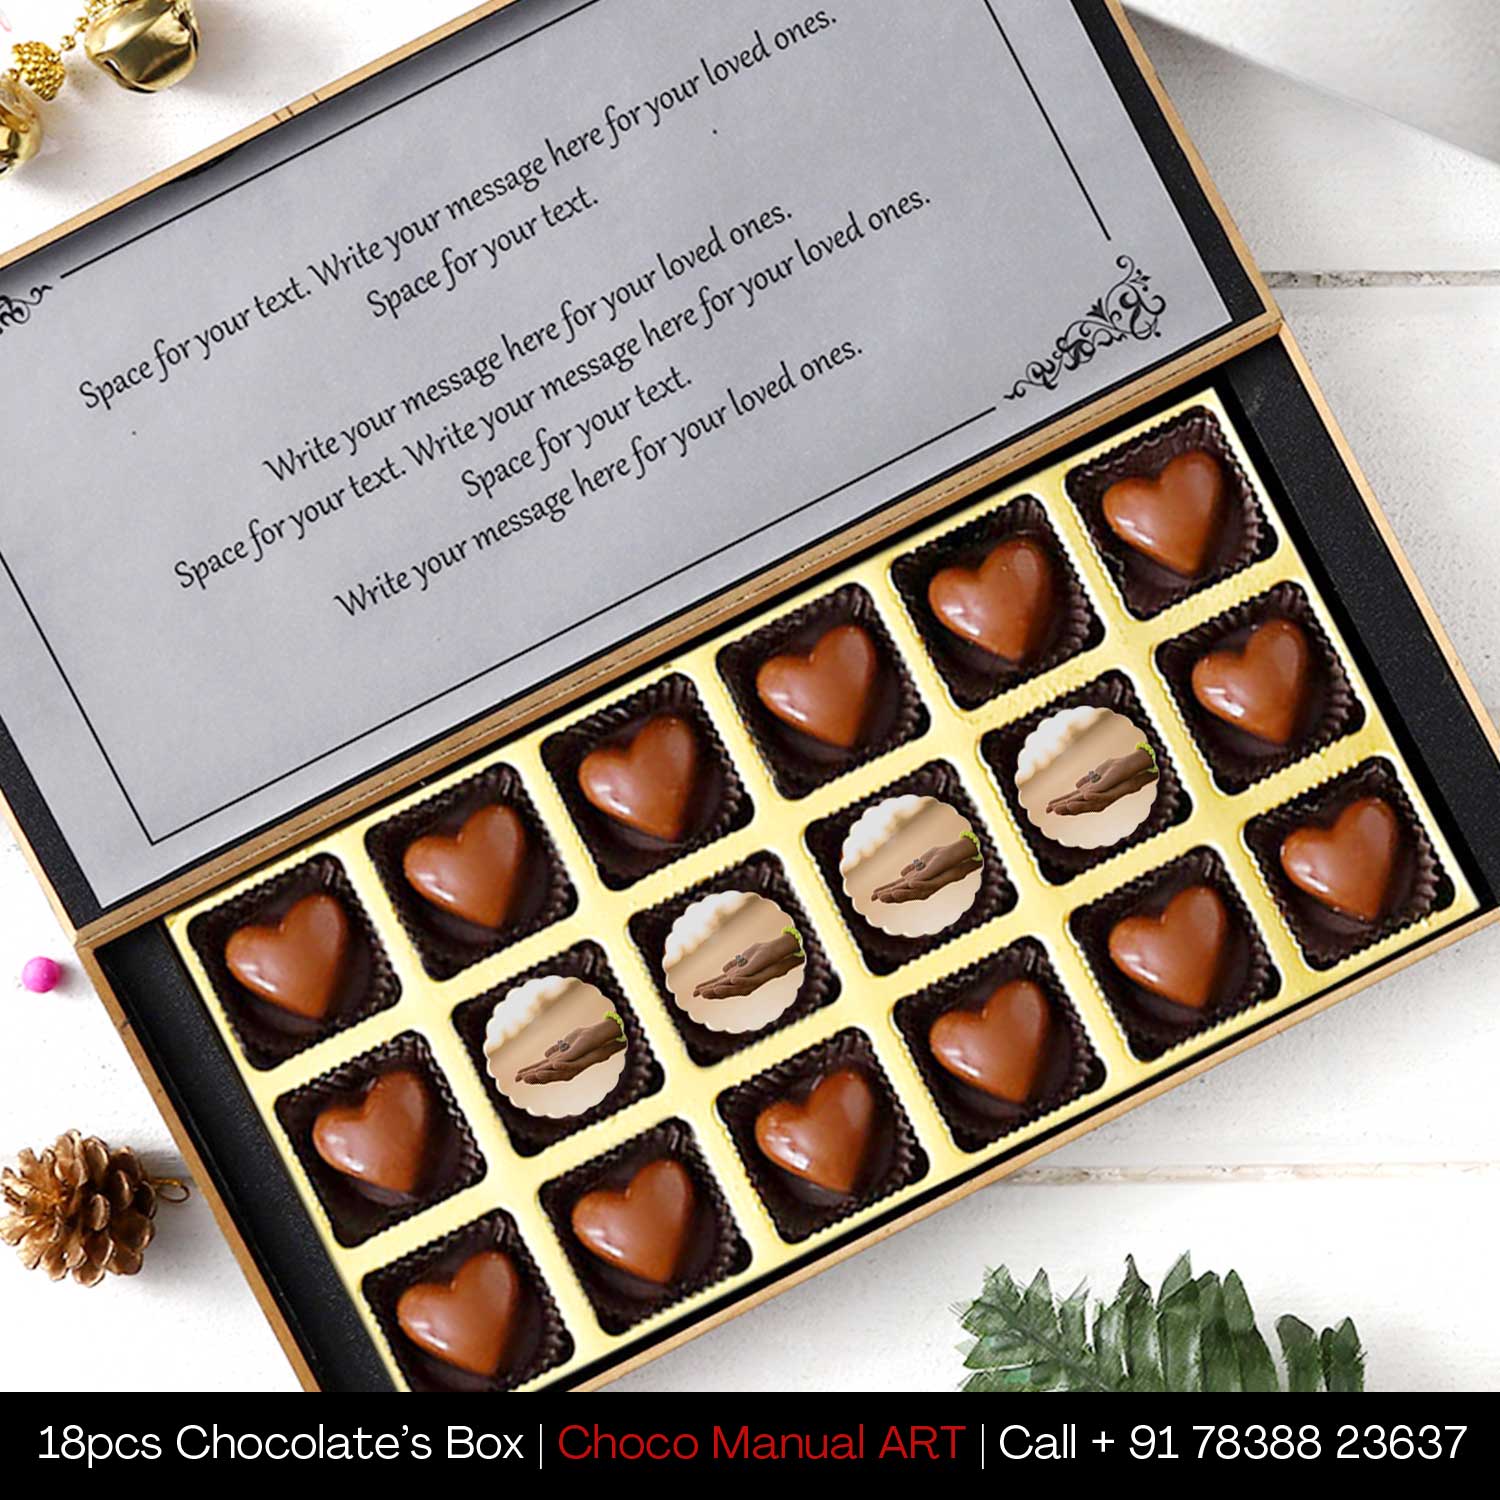 Buy at 399 Luxury Unique Propose Day Chocolate gift